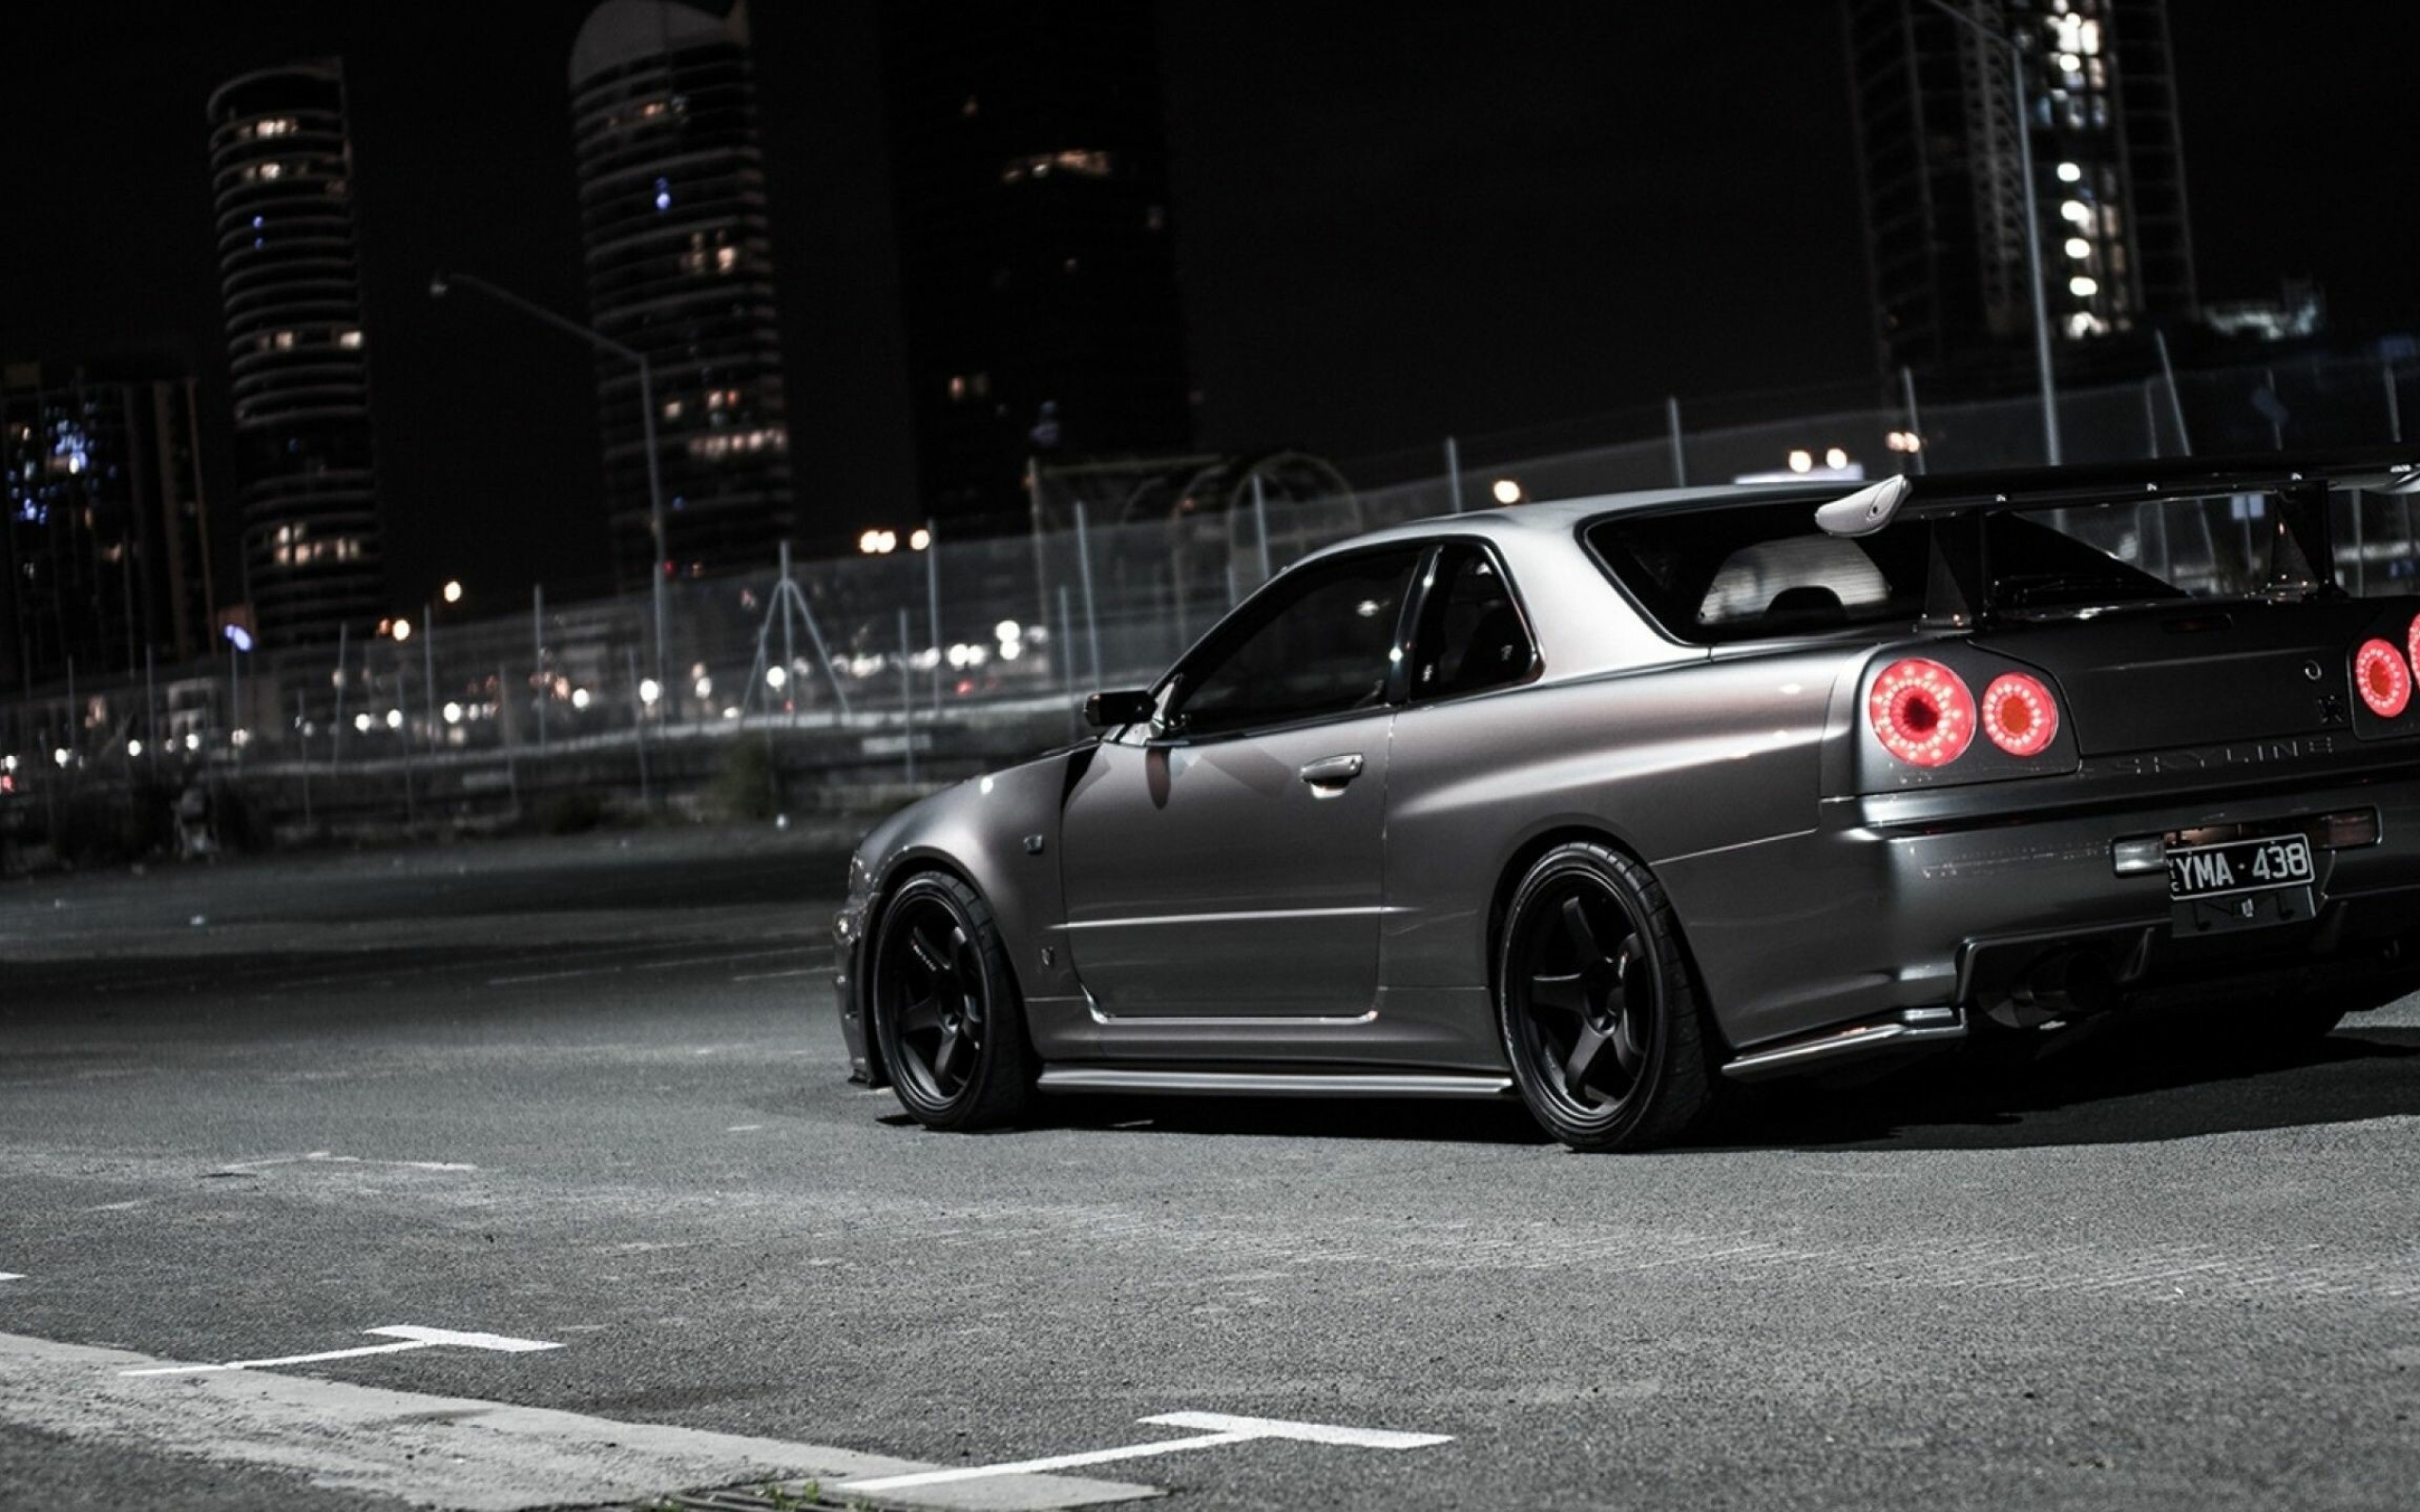 Nissan: Skyline, A brand of automobile originally produced by the Prince Motor Company starting in 1957. 2560x1600 HD Wallpaper.